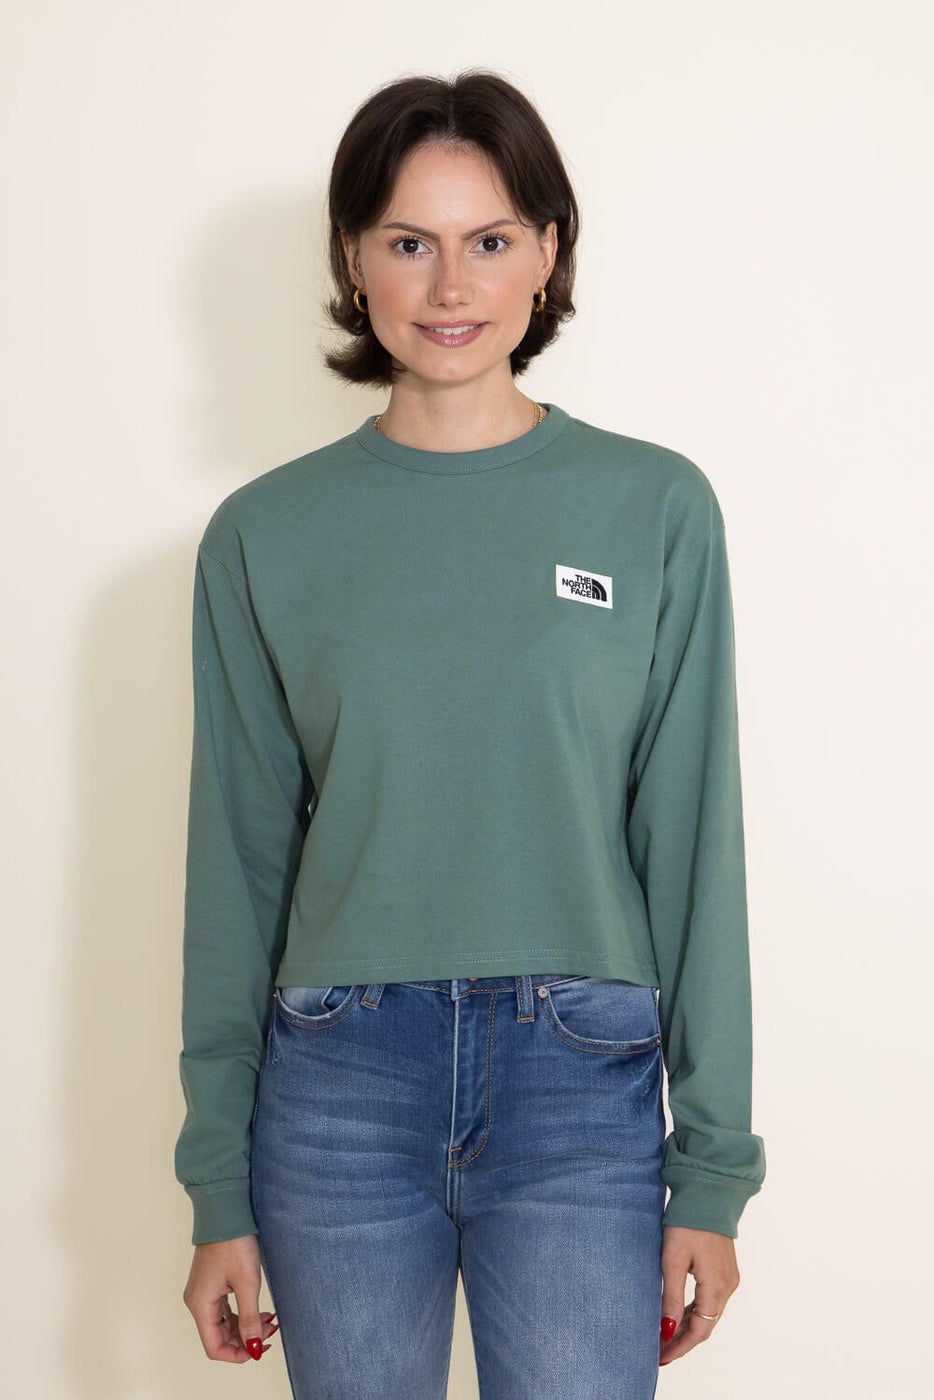 The North Face Heritage Patch Long Sleeve T-Shirt for Women in